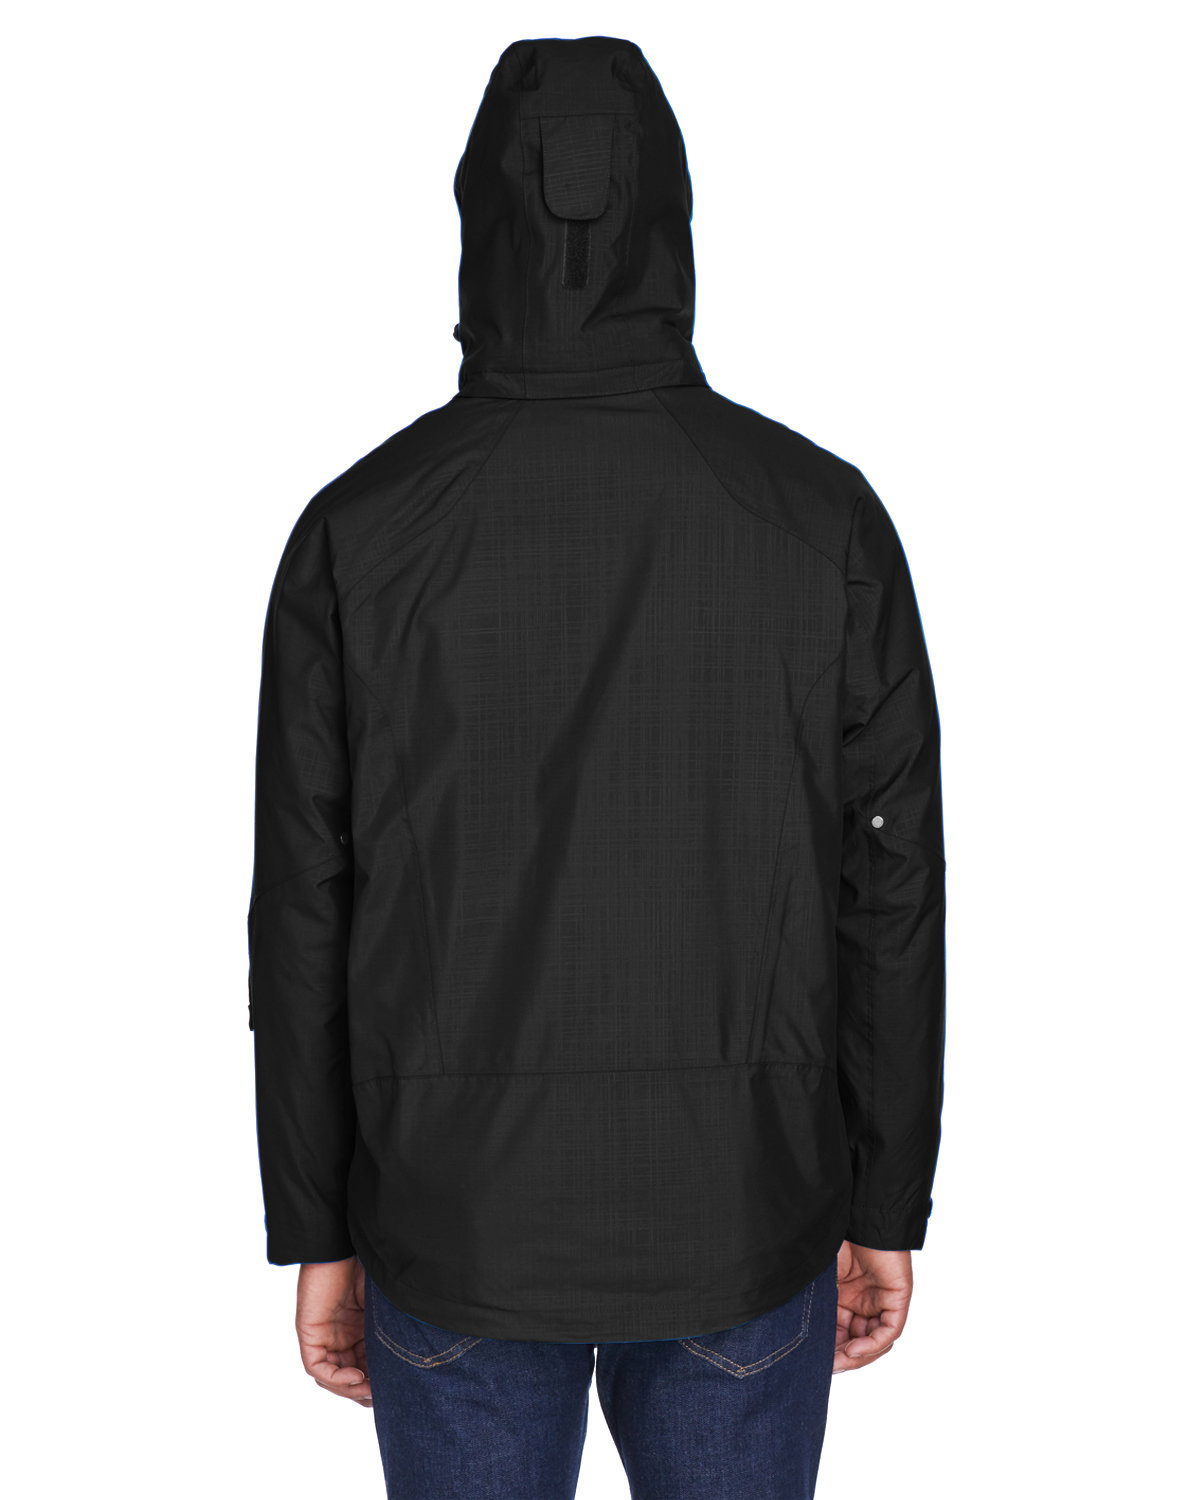 North End Men's Caprice 3-in-1 Jacket with Soft Shell Liner | alphabroder